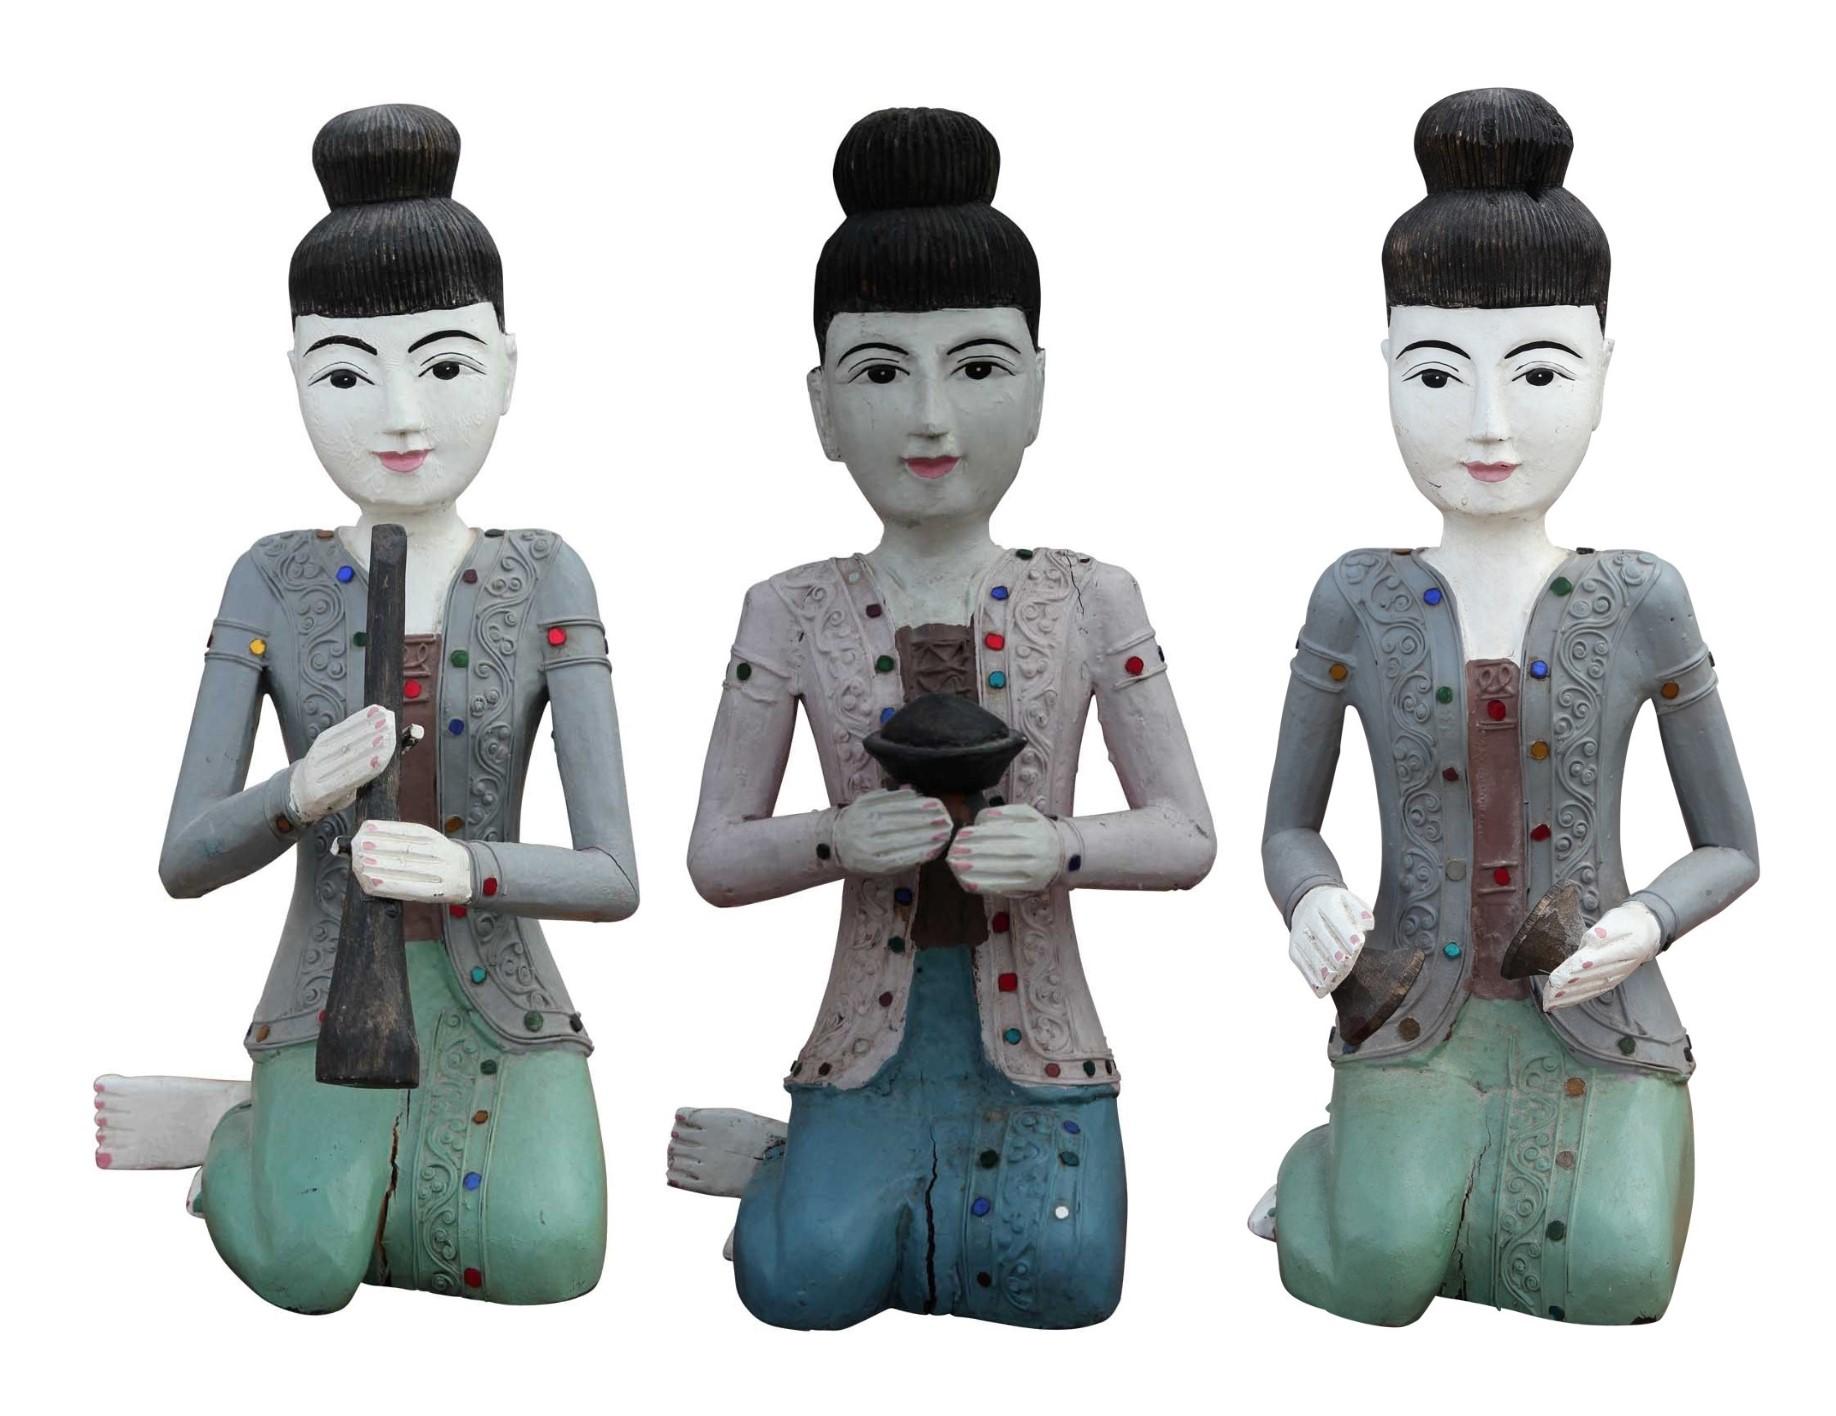 3 Wooden Japanese Girls Playing Musical Instruments - Sculpture by Unknown